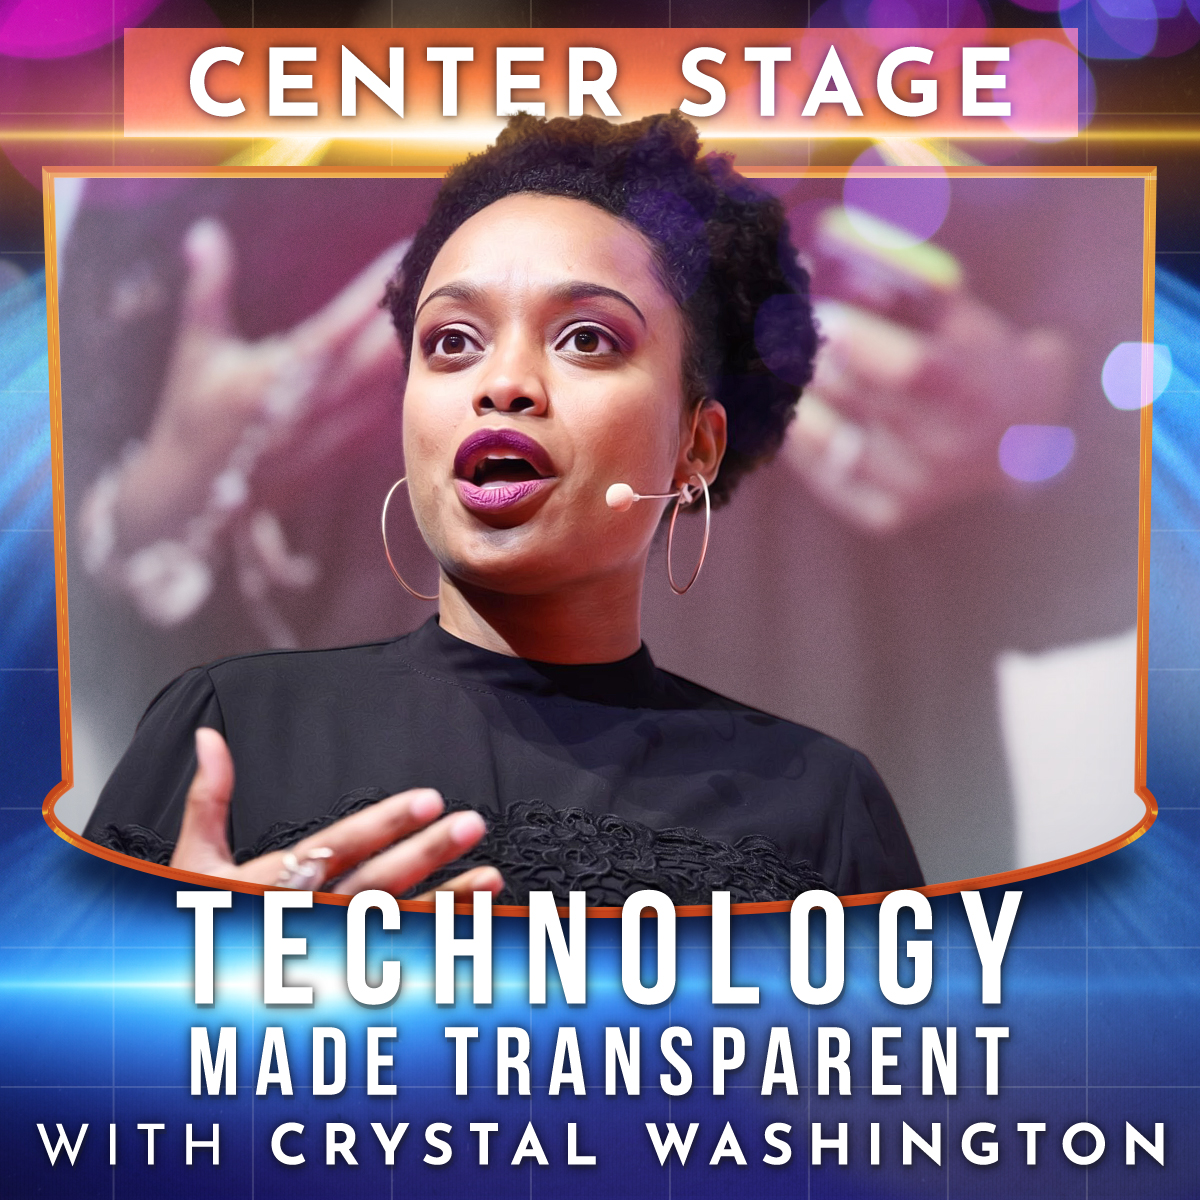 Technology Made Transparent - Center Stage with Crystal Washington